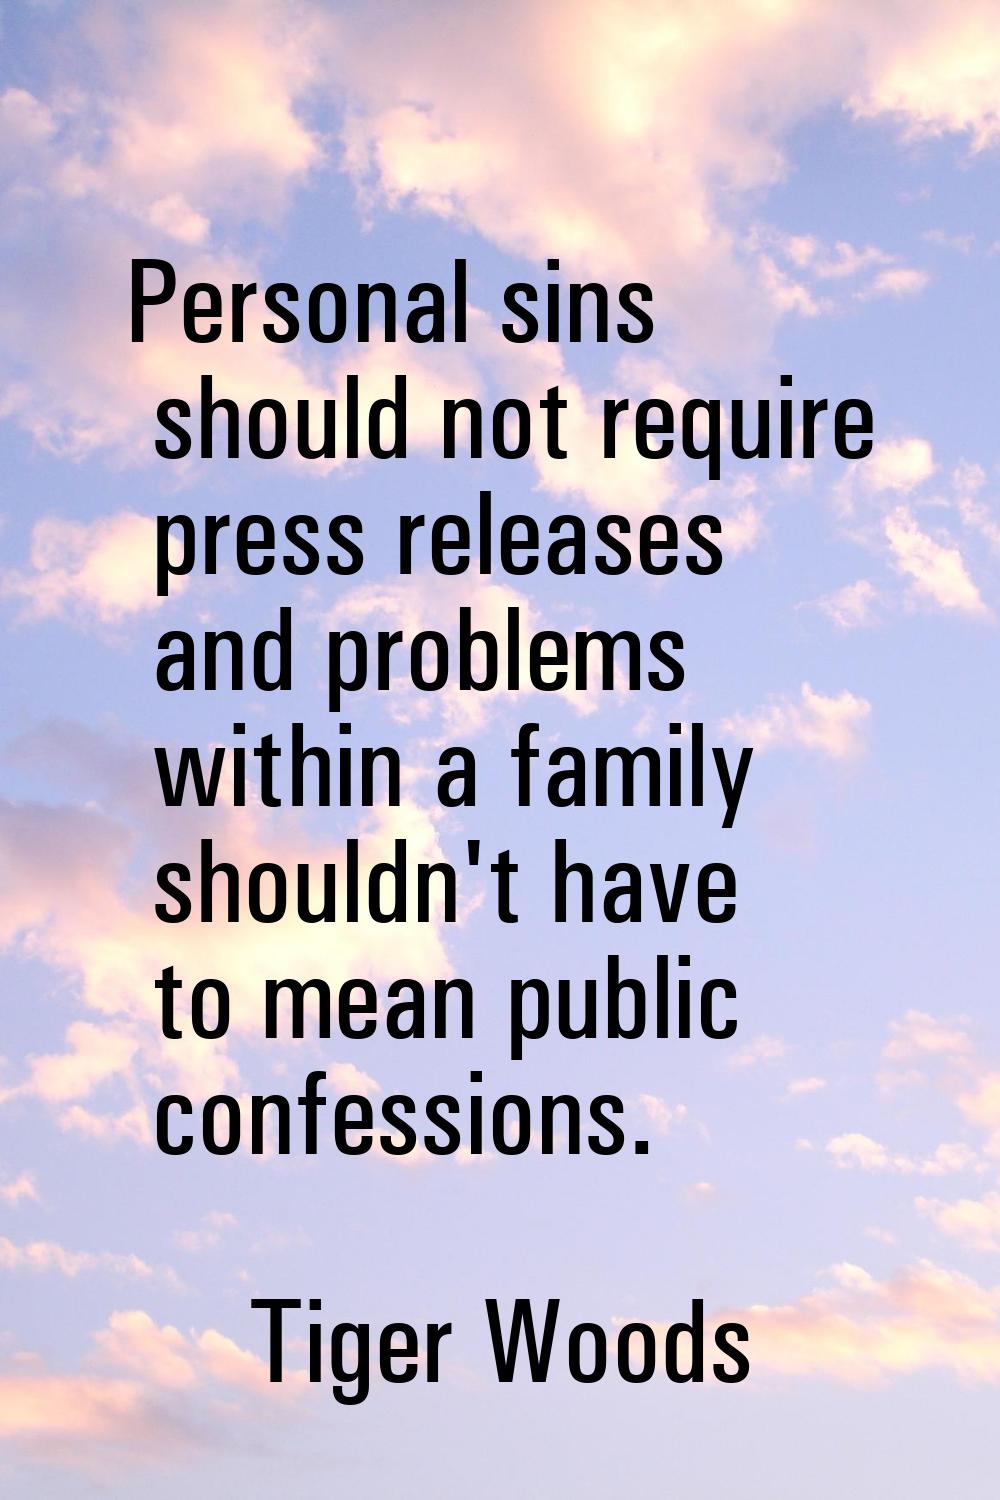 Personal sins should not require press releases and problems within a family shouldn't have to mean